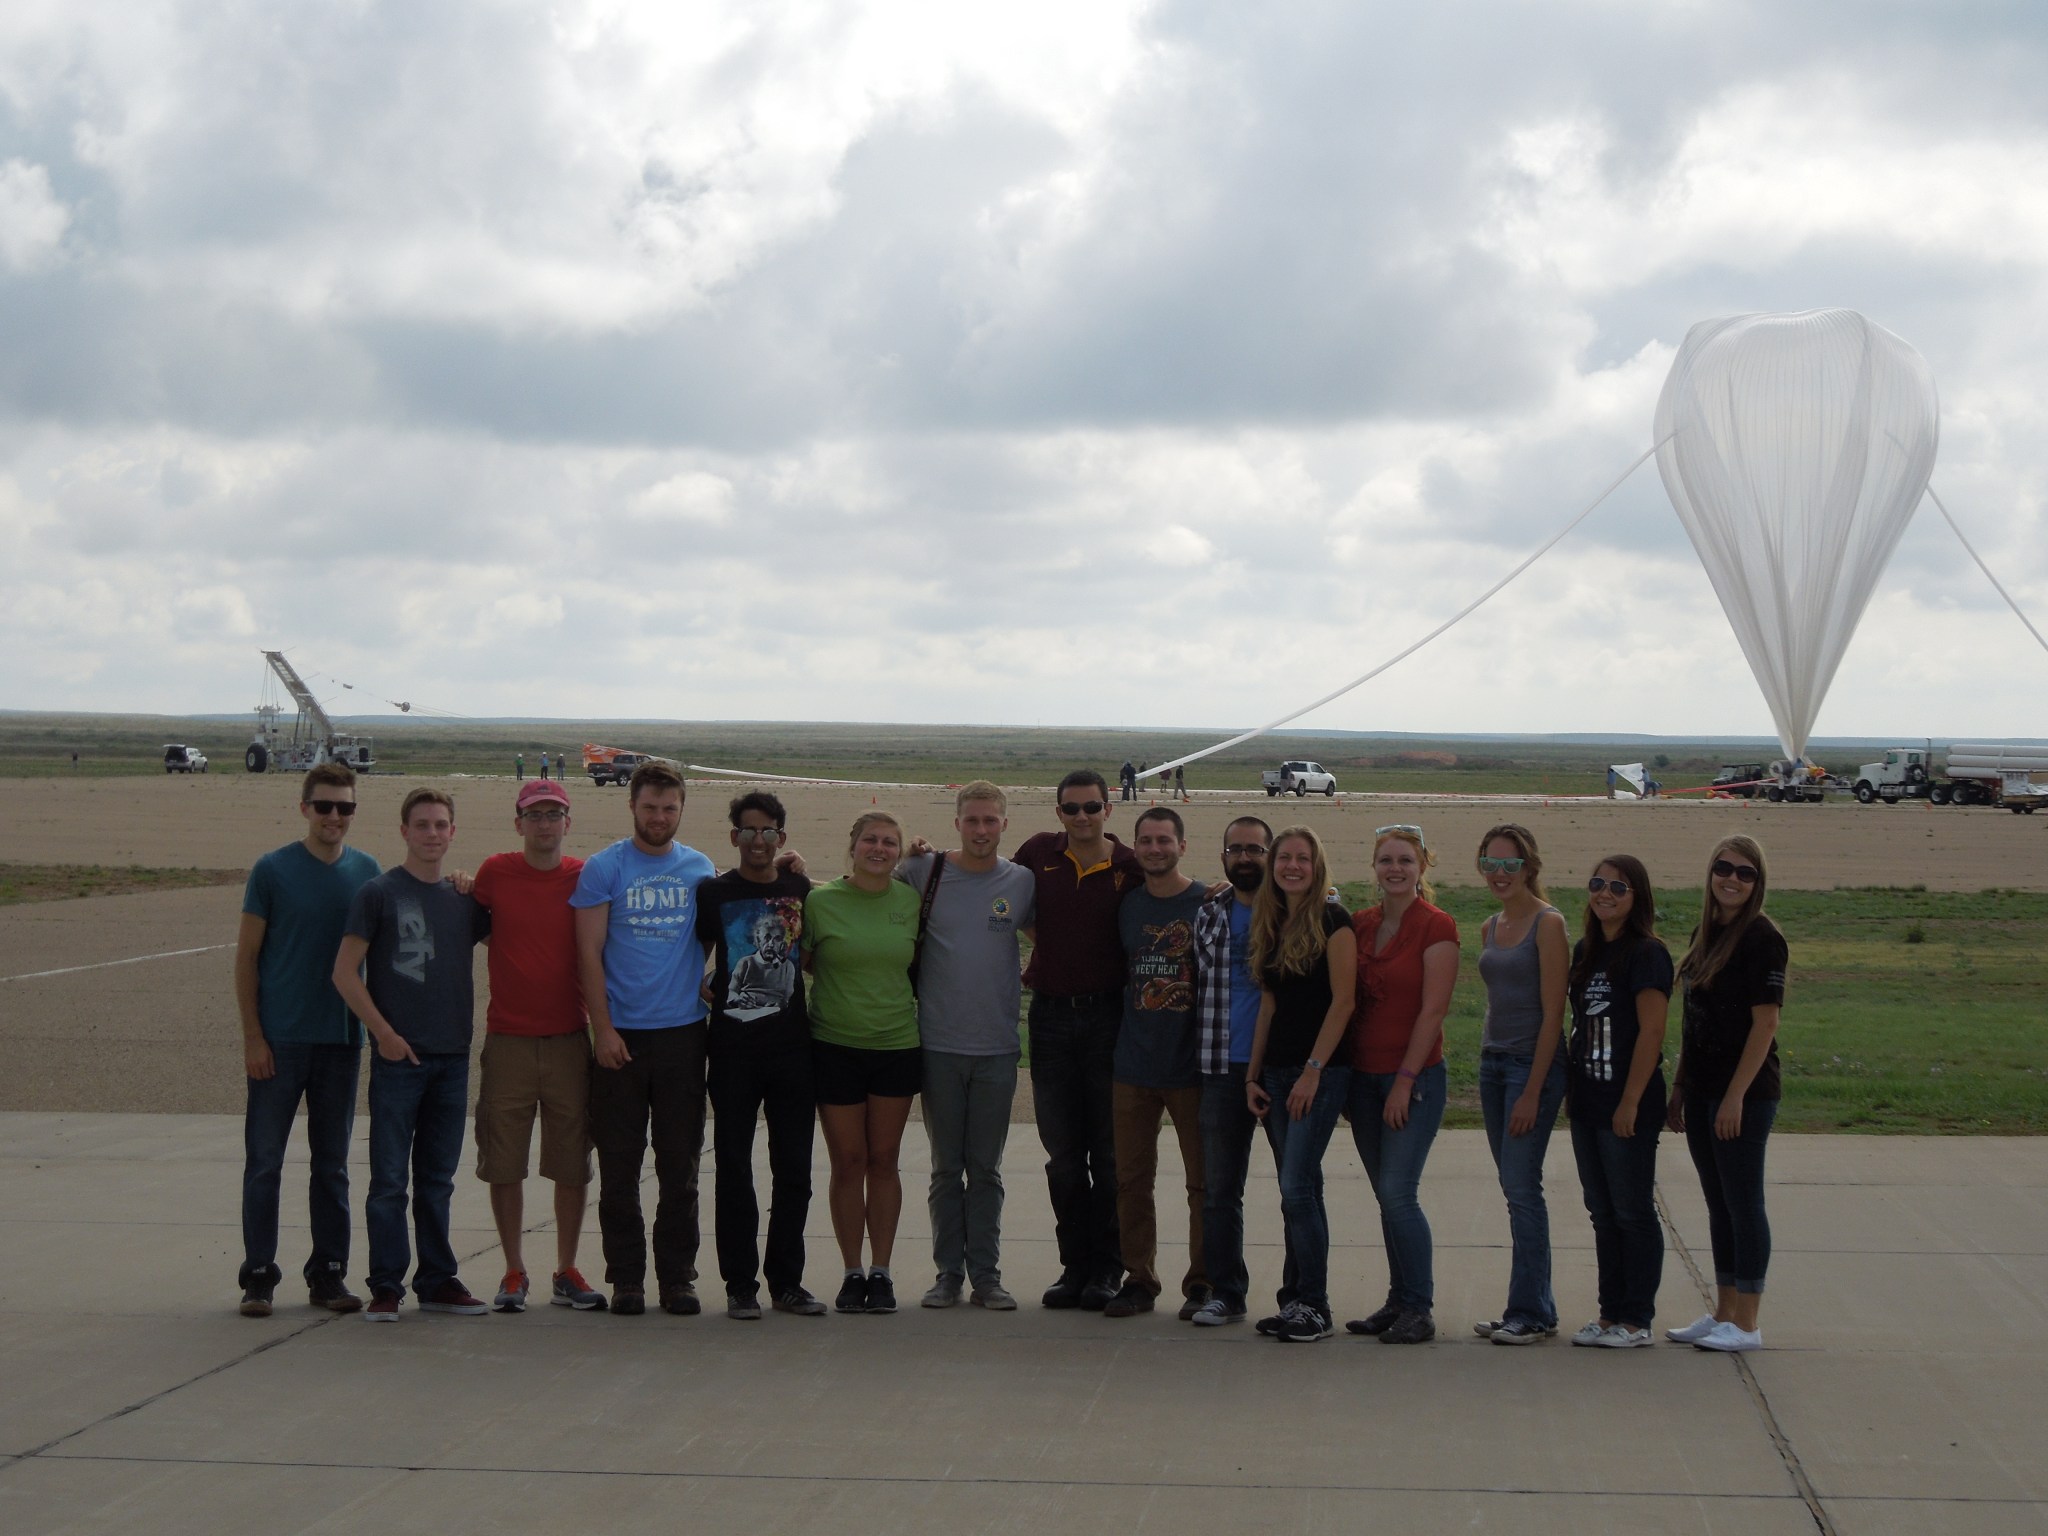 Students pose in front of the 2016 HASP payload.